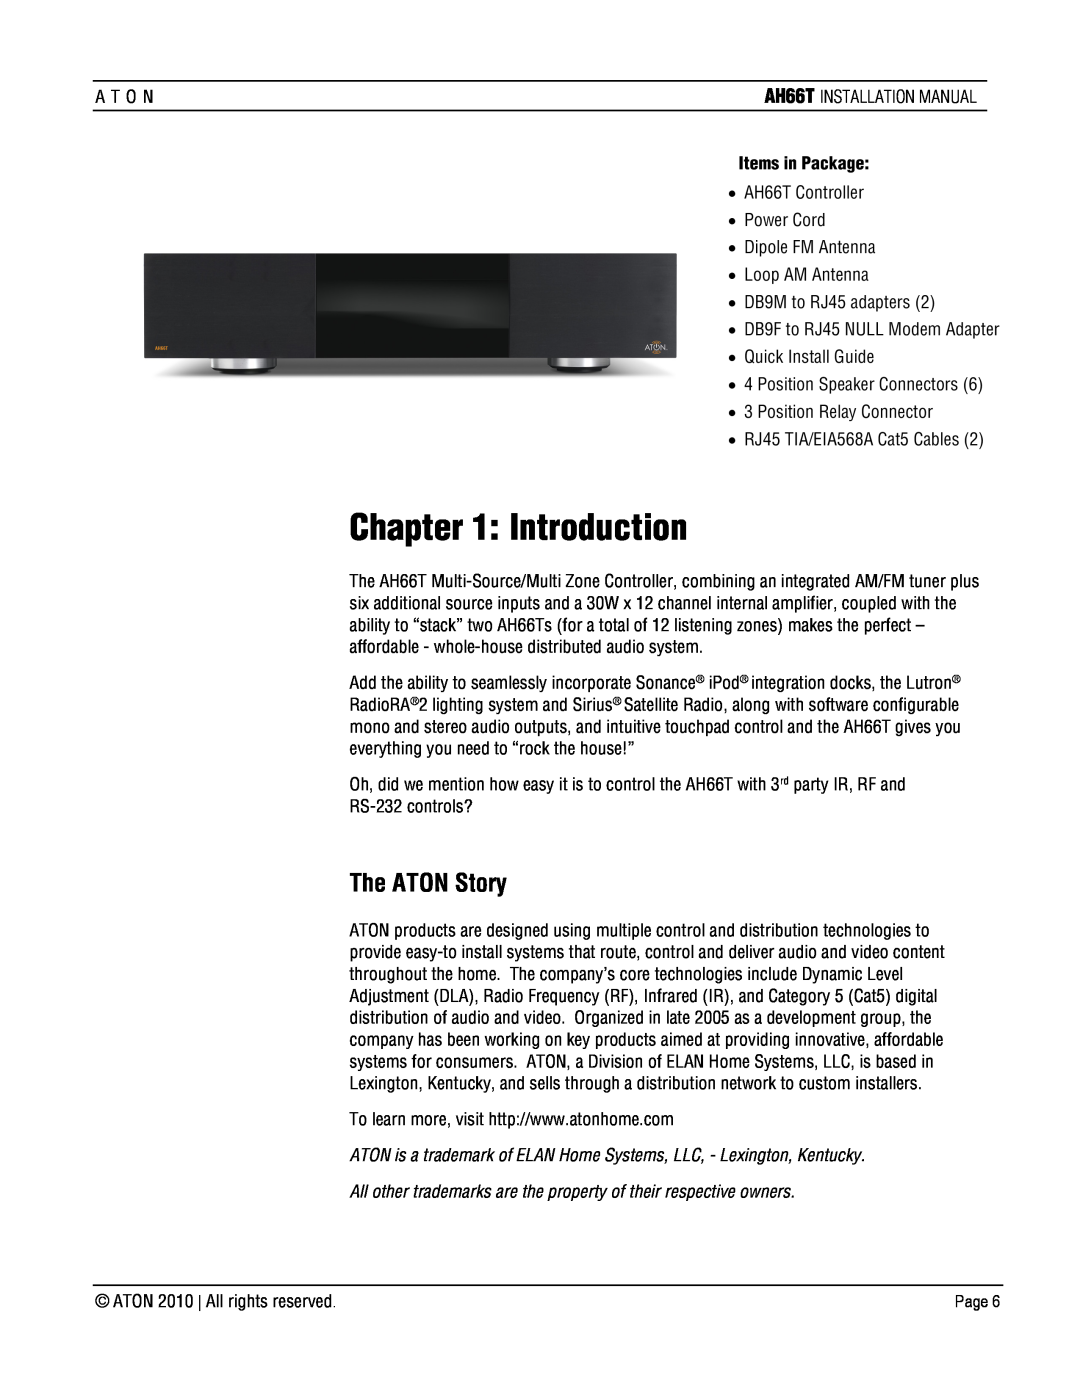 ATON AH66T-KT installation manual Introduction, The ATON Story 